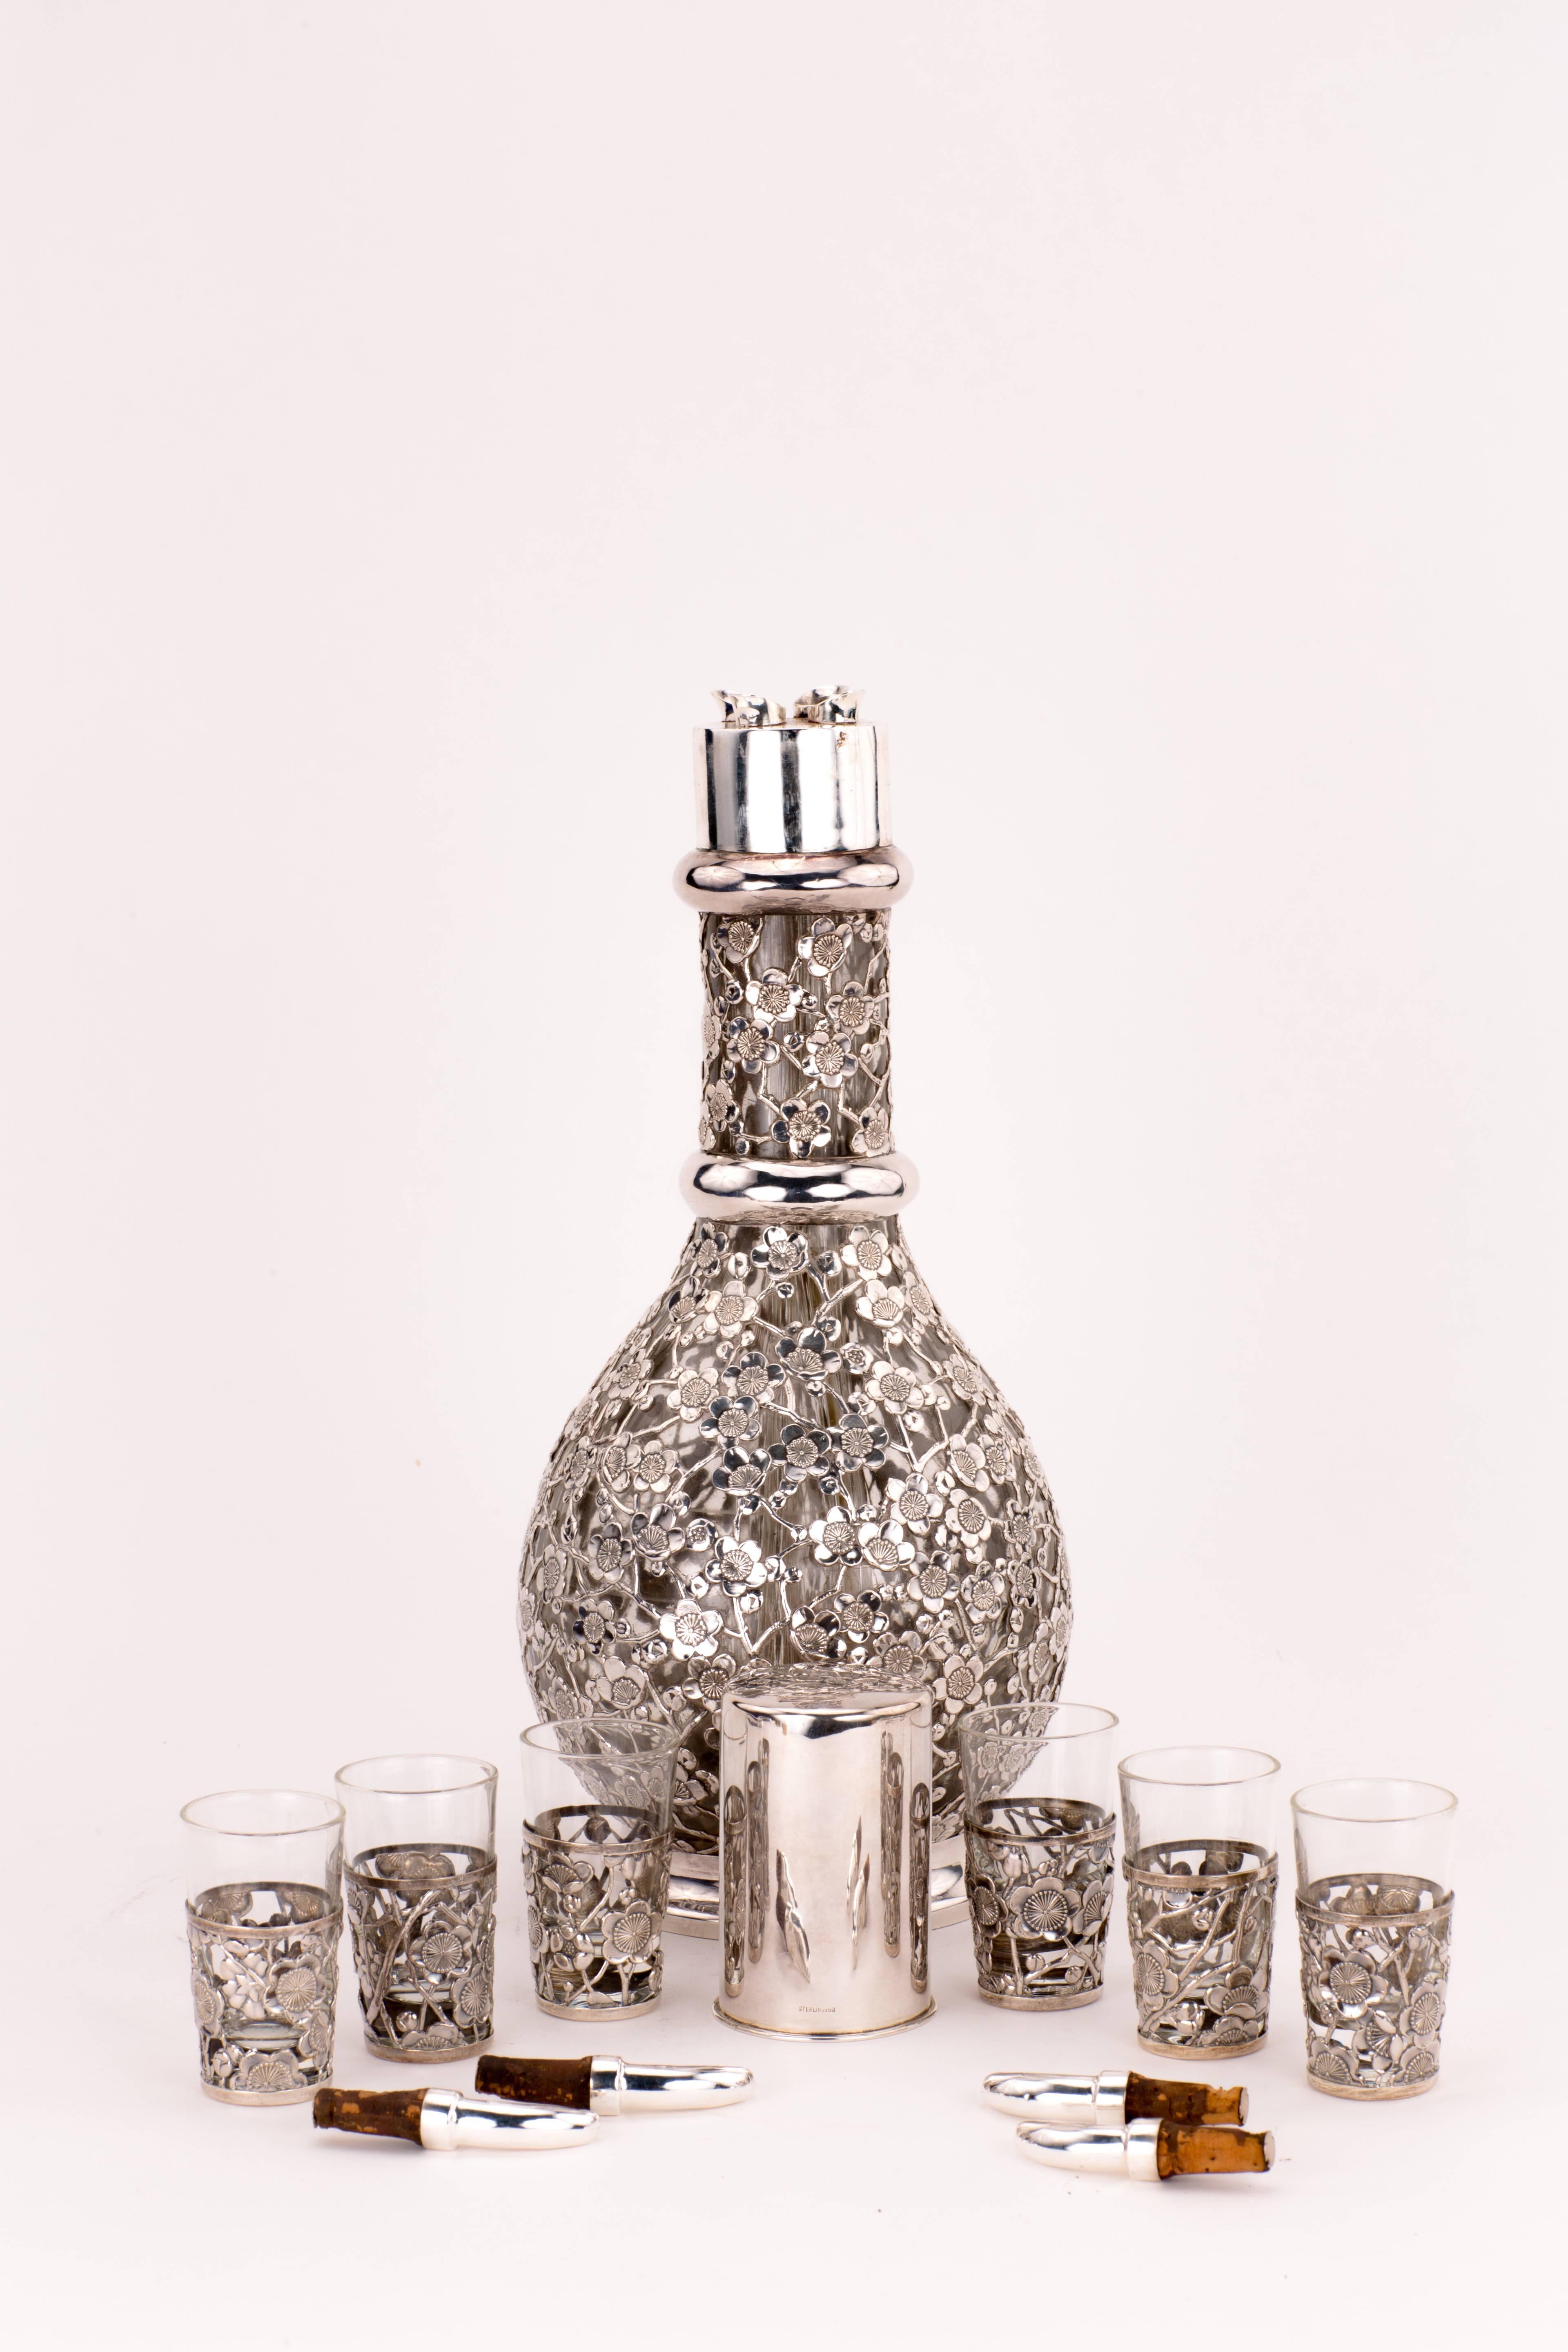 20th Century French Art Nouveau Sterling Silver Overlay Decanter and Matching Cordials